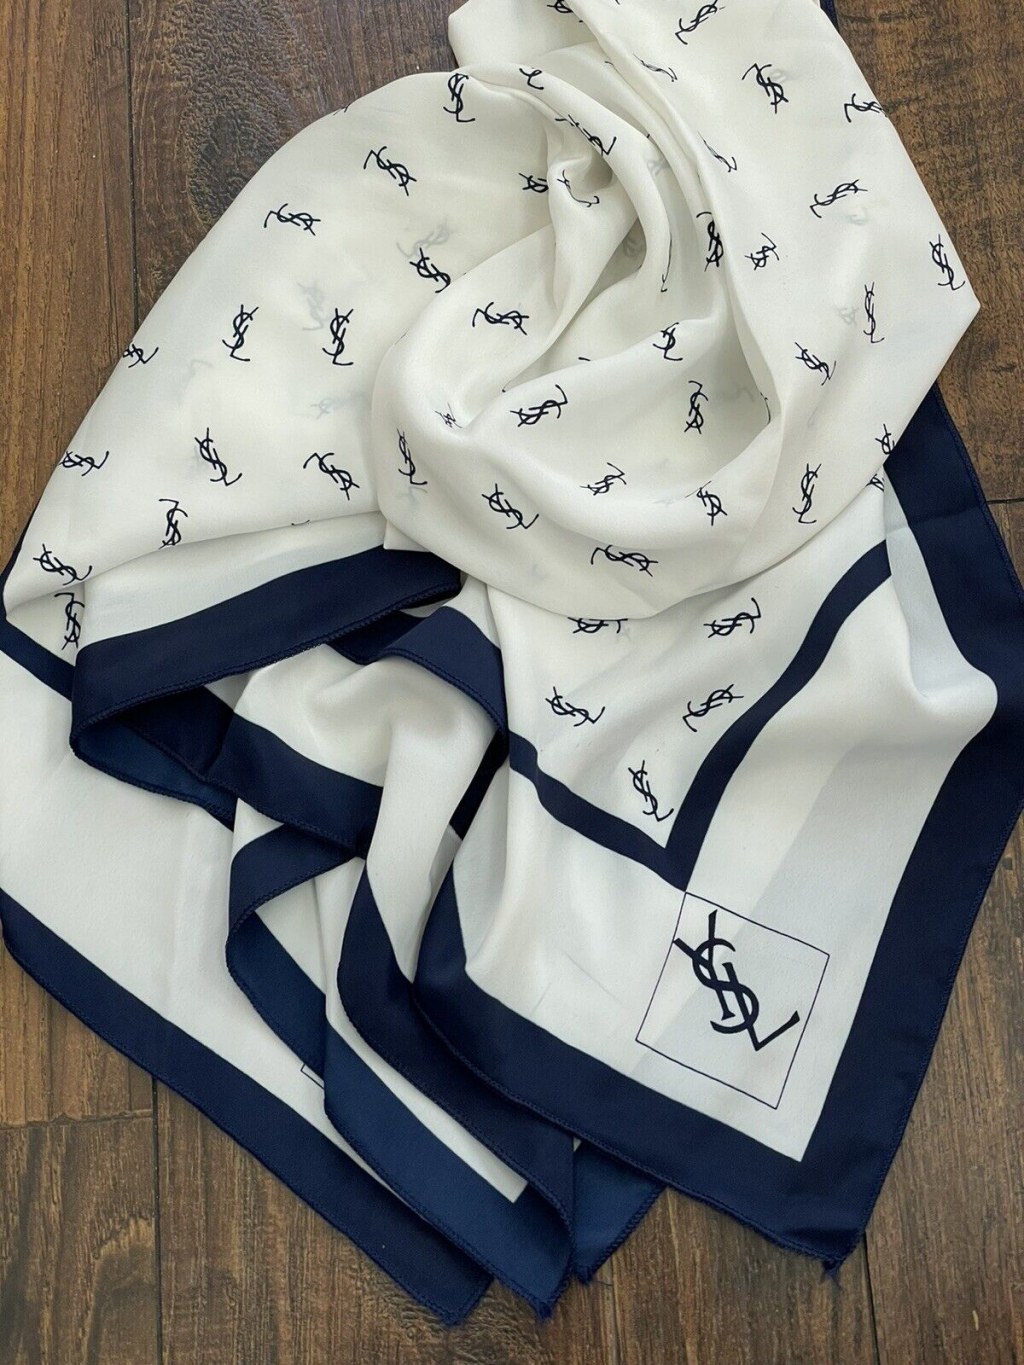 Picture of: Yves Saint Laurent Logo Women’s Silk Scarf Large Blue Navy White Vintage  ”x”